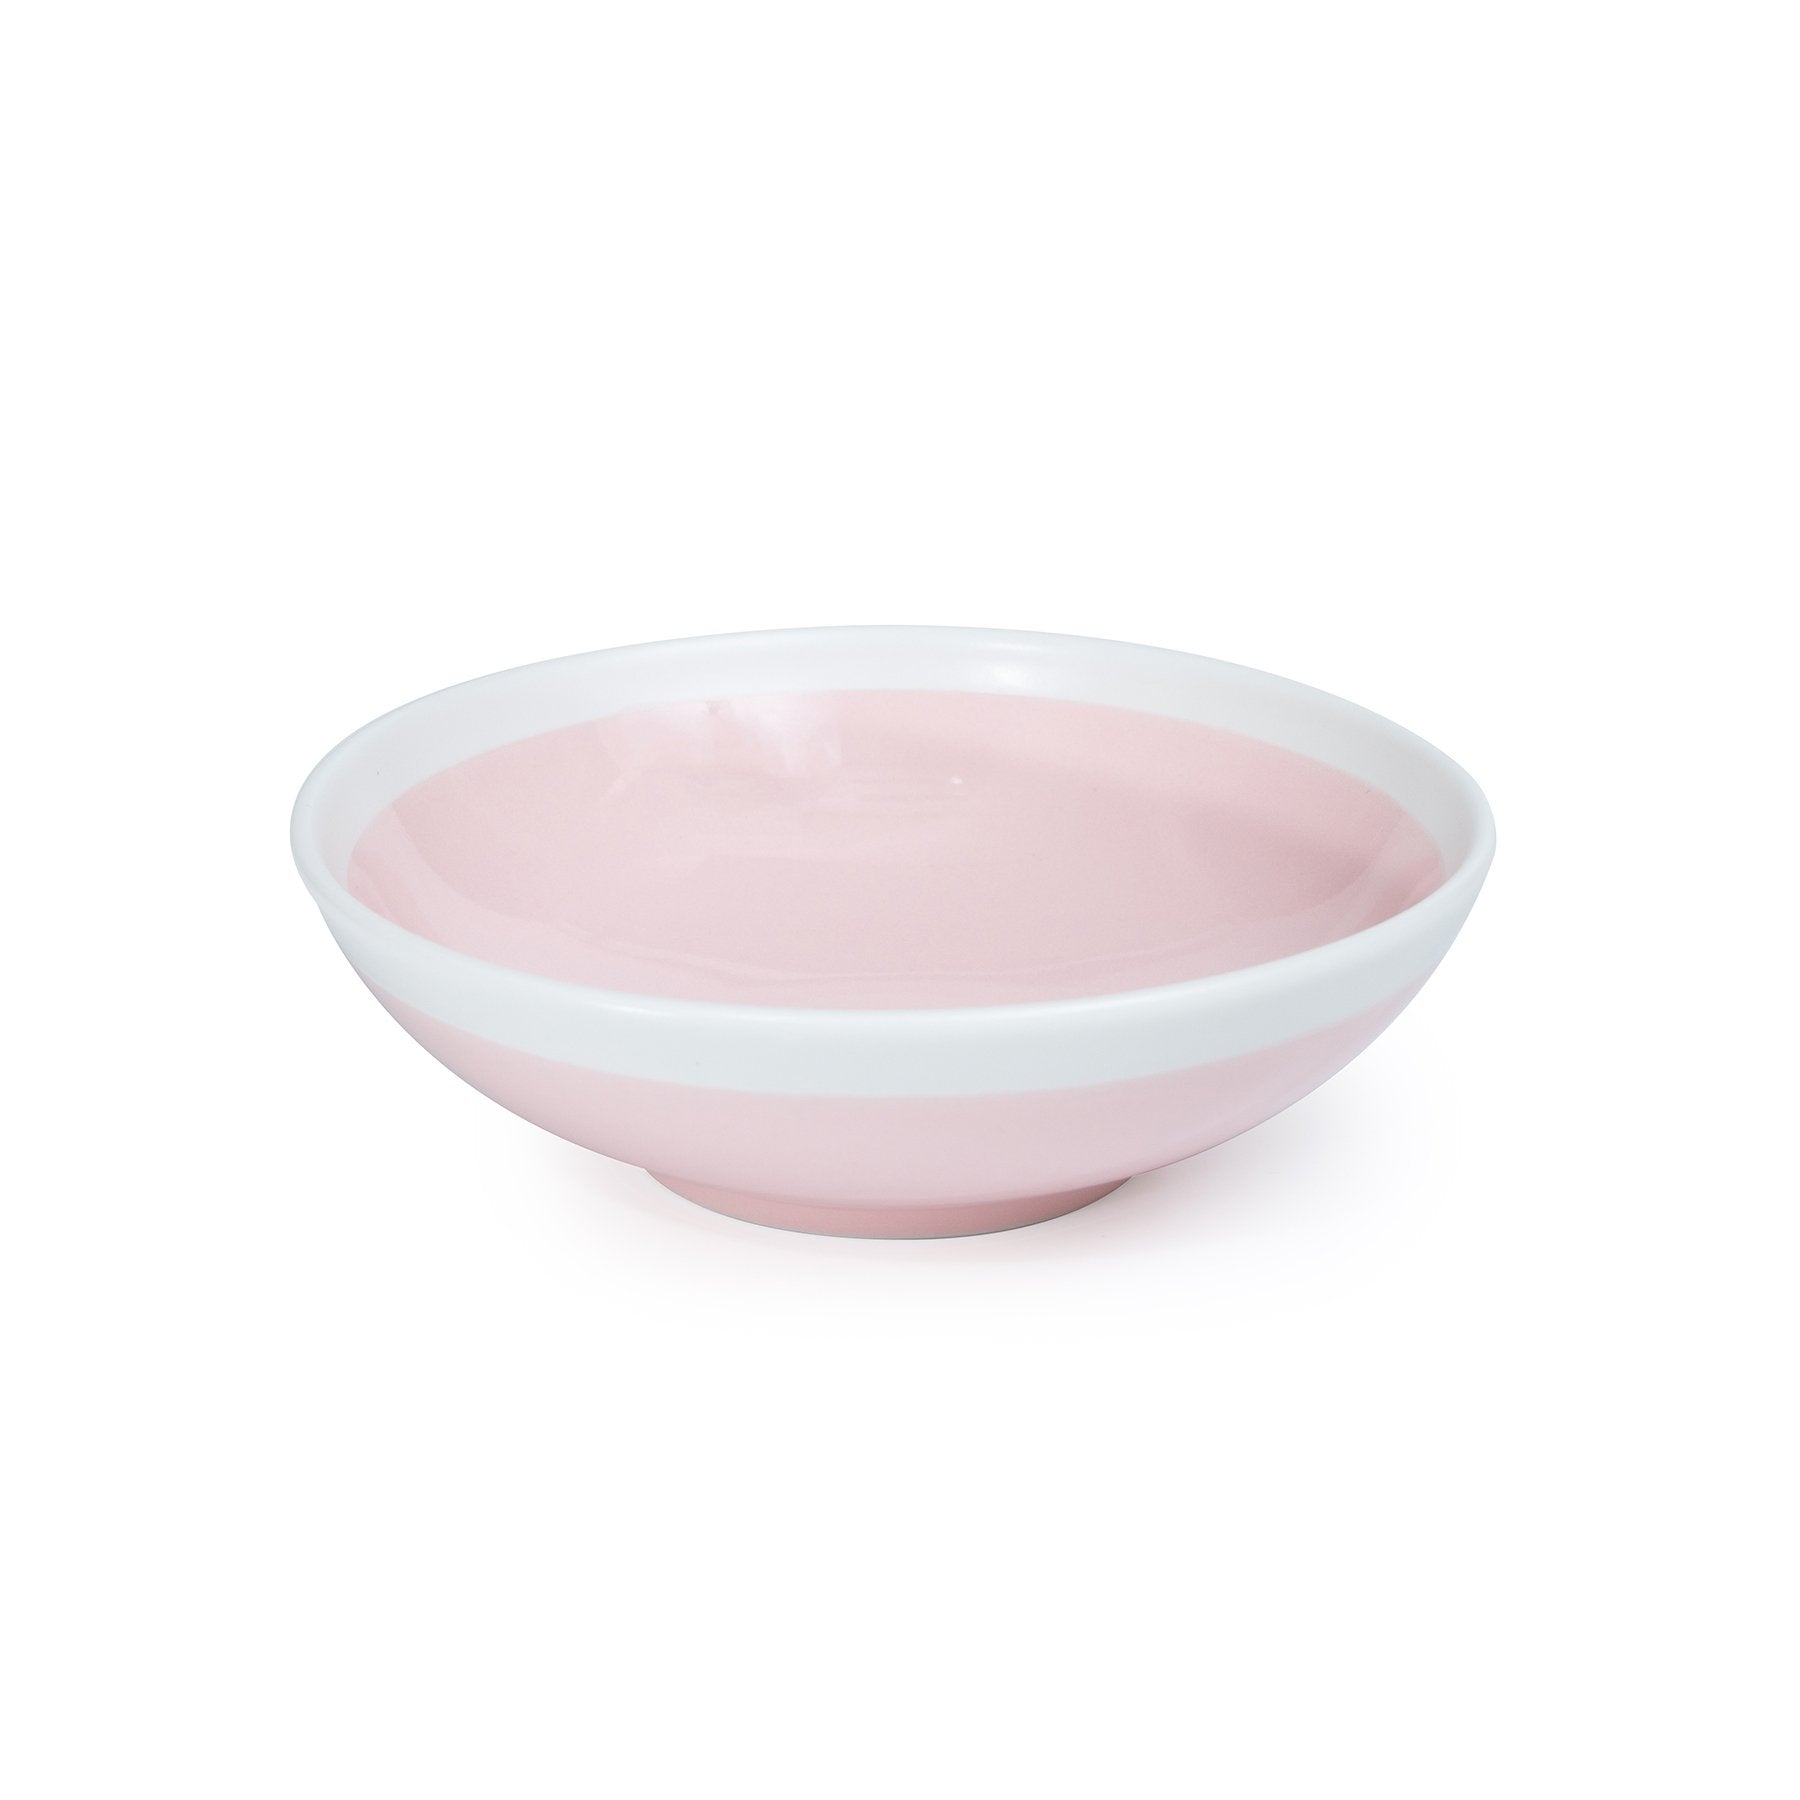 Cozy Pink by Don Bellini, Dinner Bowl